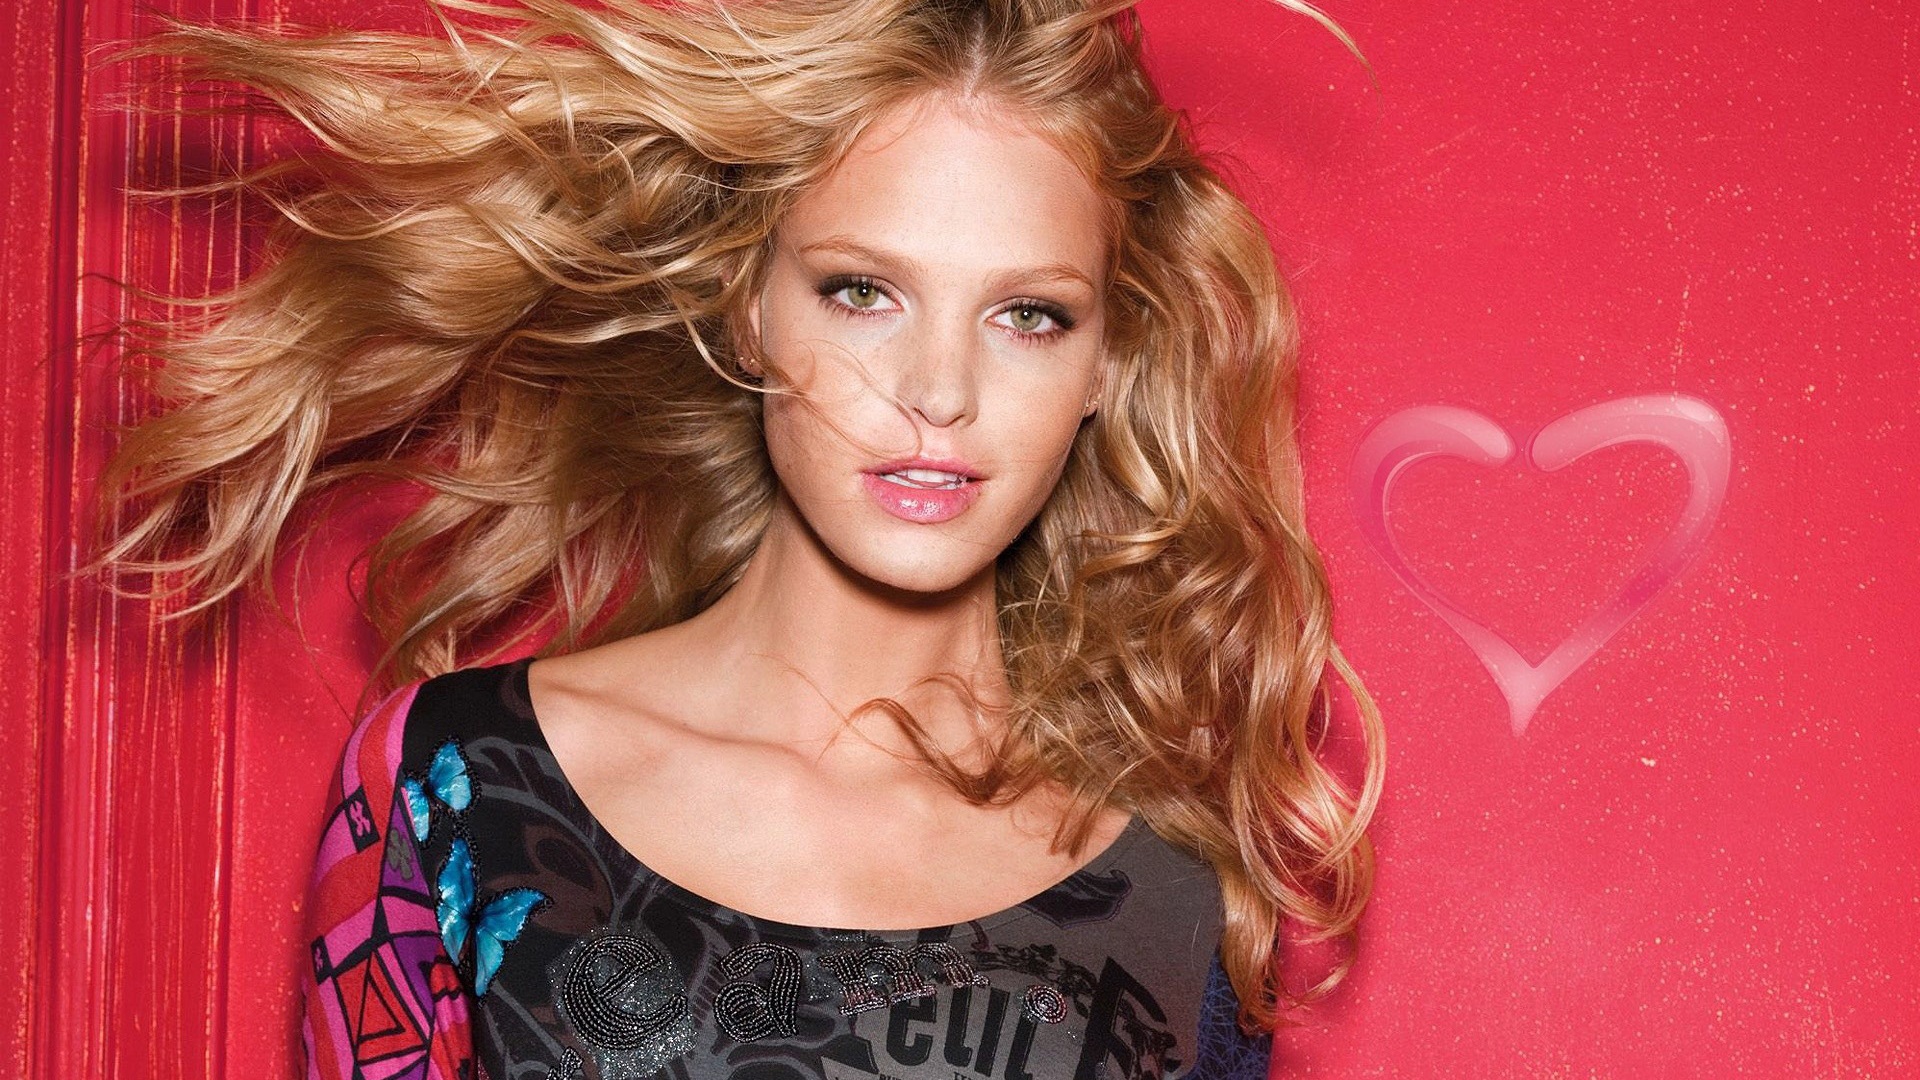 Erin Heatherton Wallpapers Images Photos Pictures Backgrounds